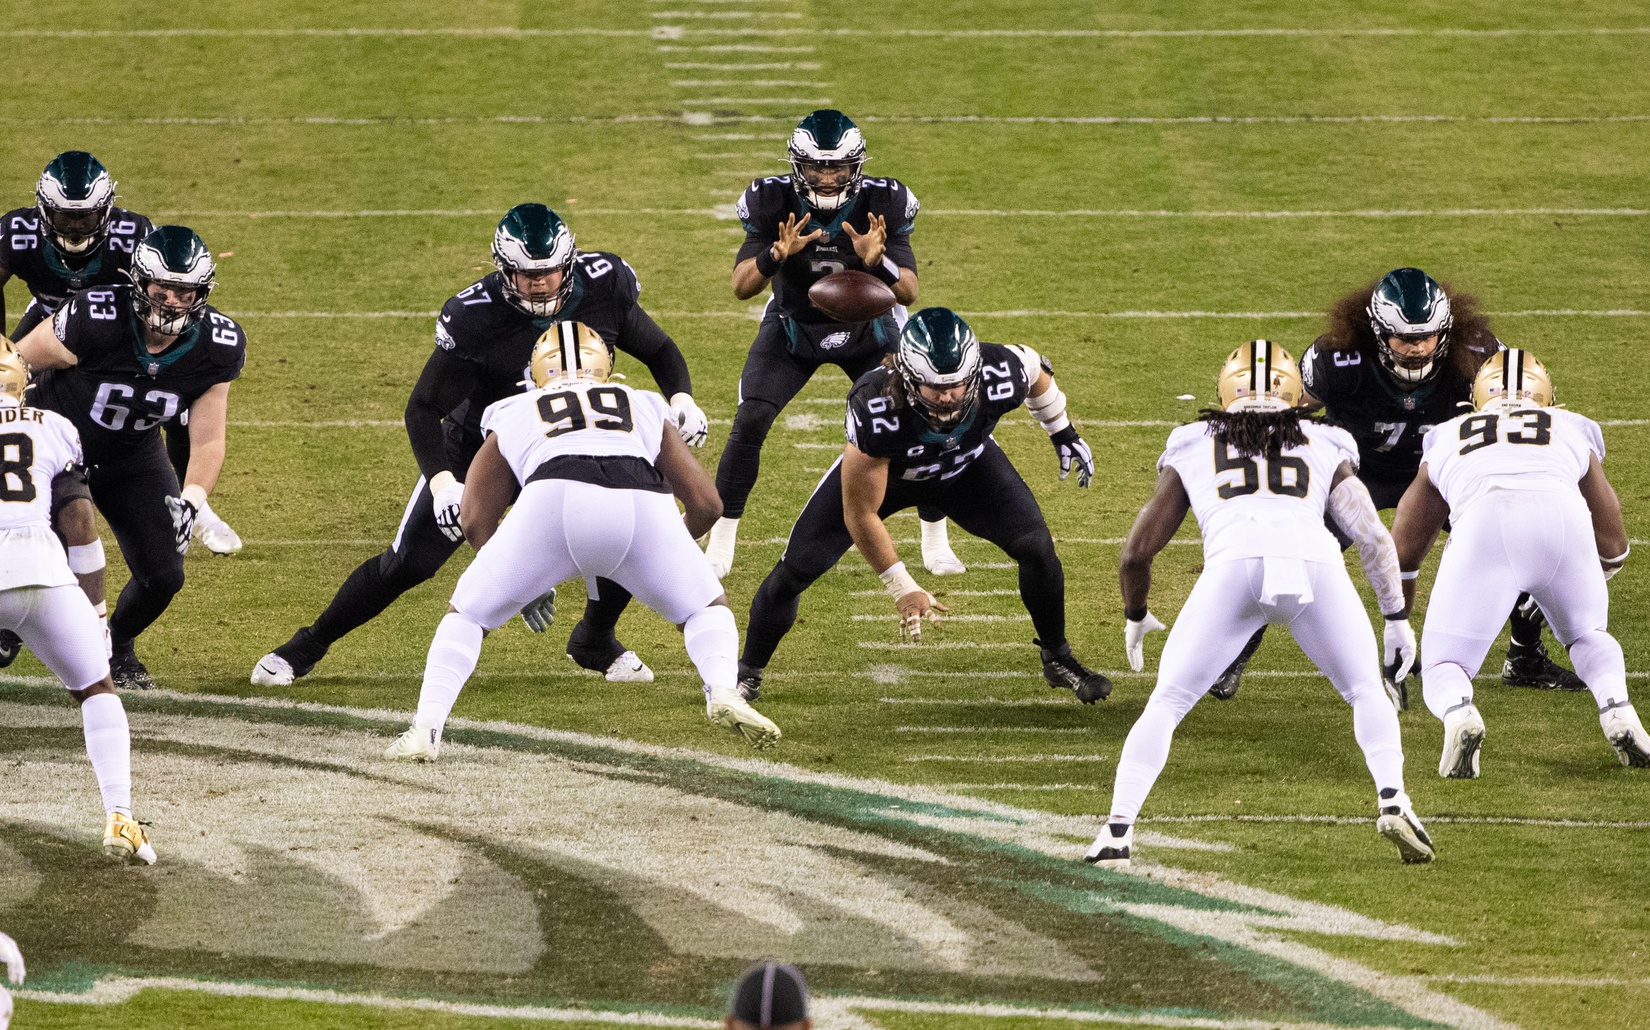 Eagles quarterback Jalen Hurts (2) receives a snap from center Jason Kelce (62) against the New Orleans Saints. Mandatory Credit: Bill Streicher-USA TODAY Sports